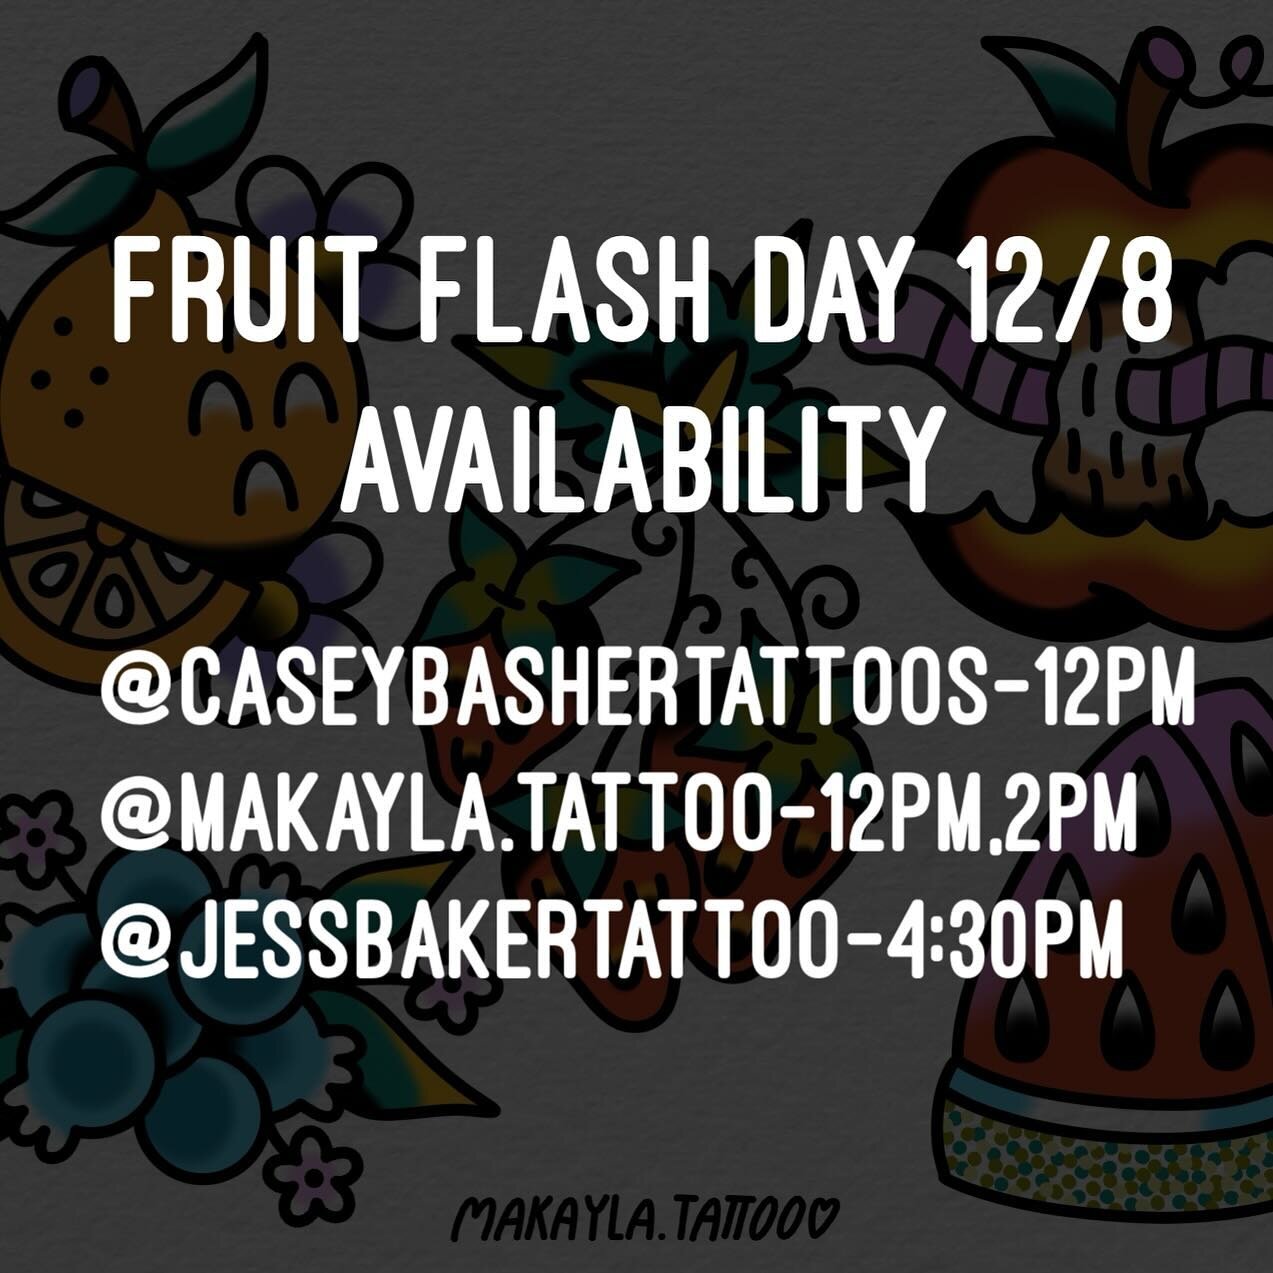 We have a couple more slots available for our fruit flash day this Friday 12/8! Interested in booking? Please contact each artist directly. @makayla.tattoo @caseybashertattoos @jessbakertattoo